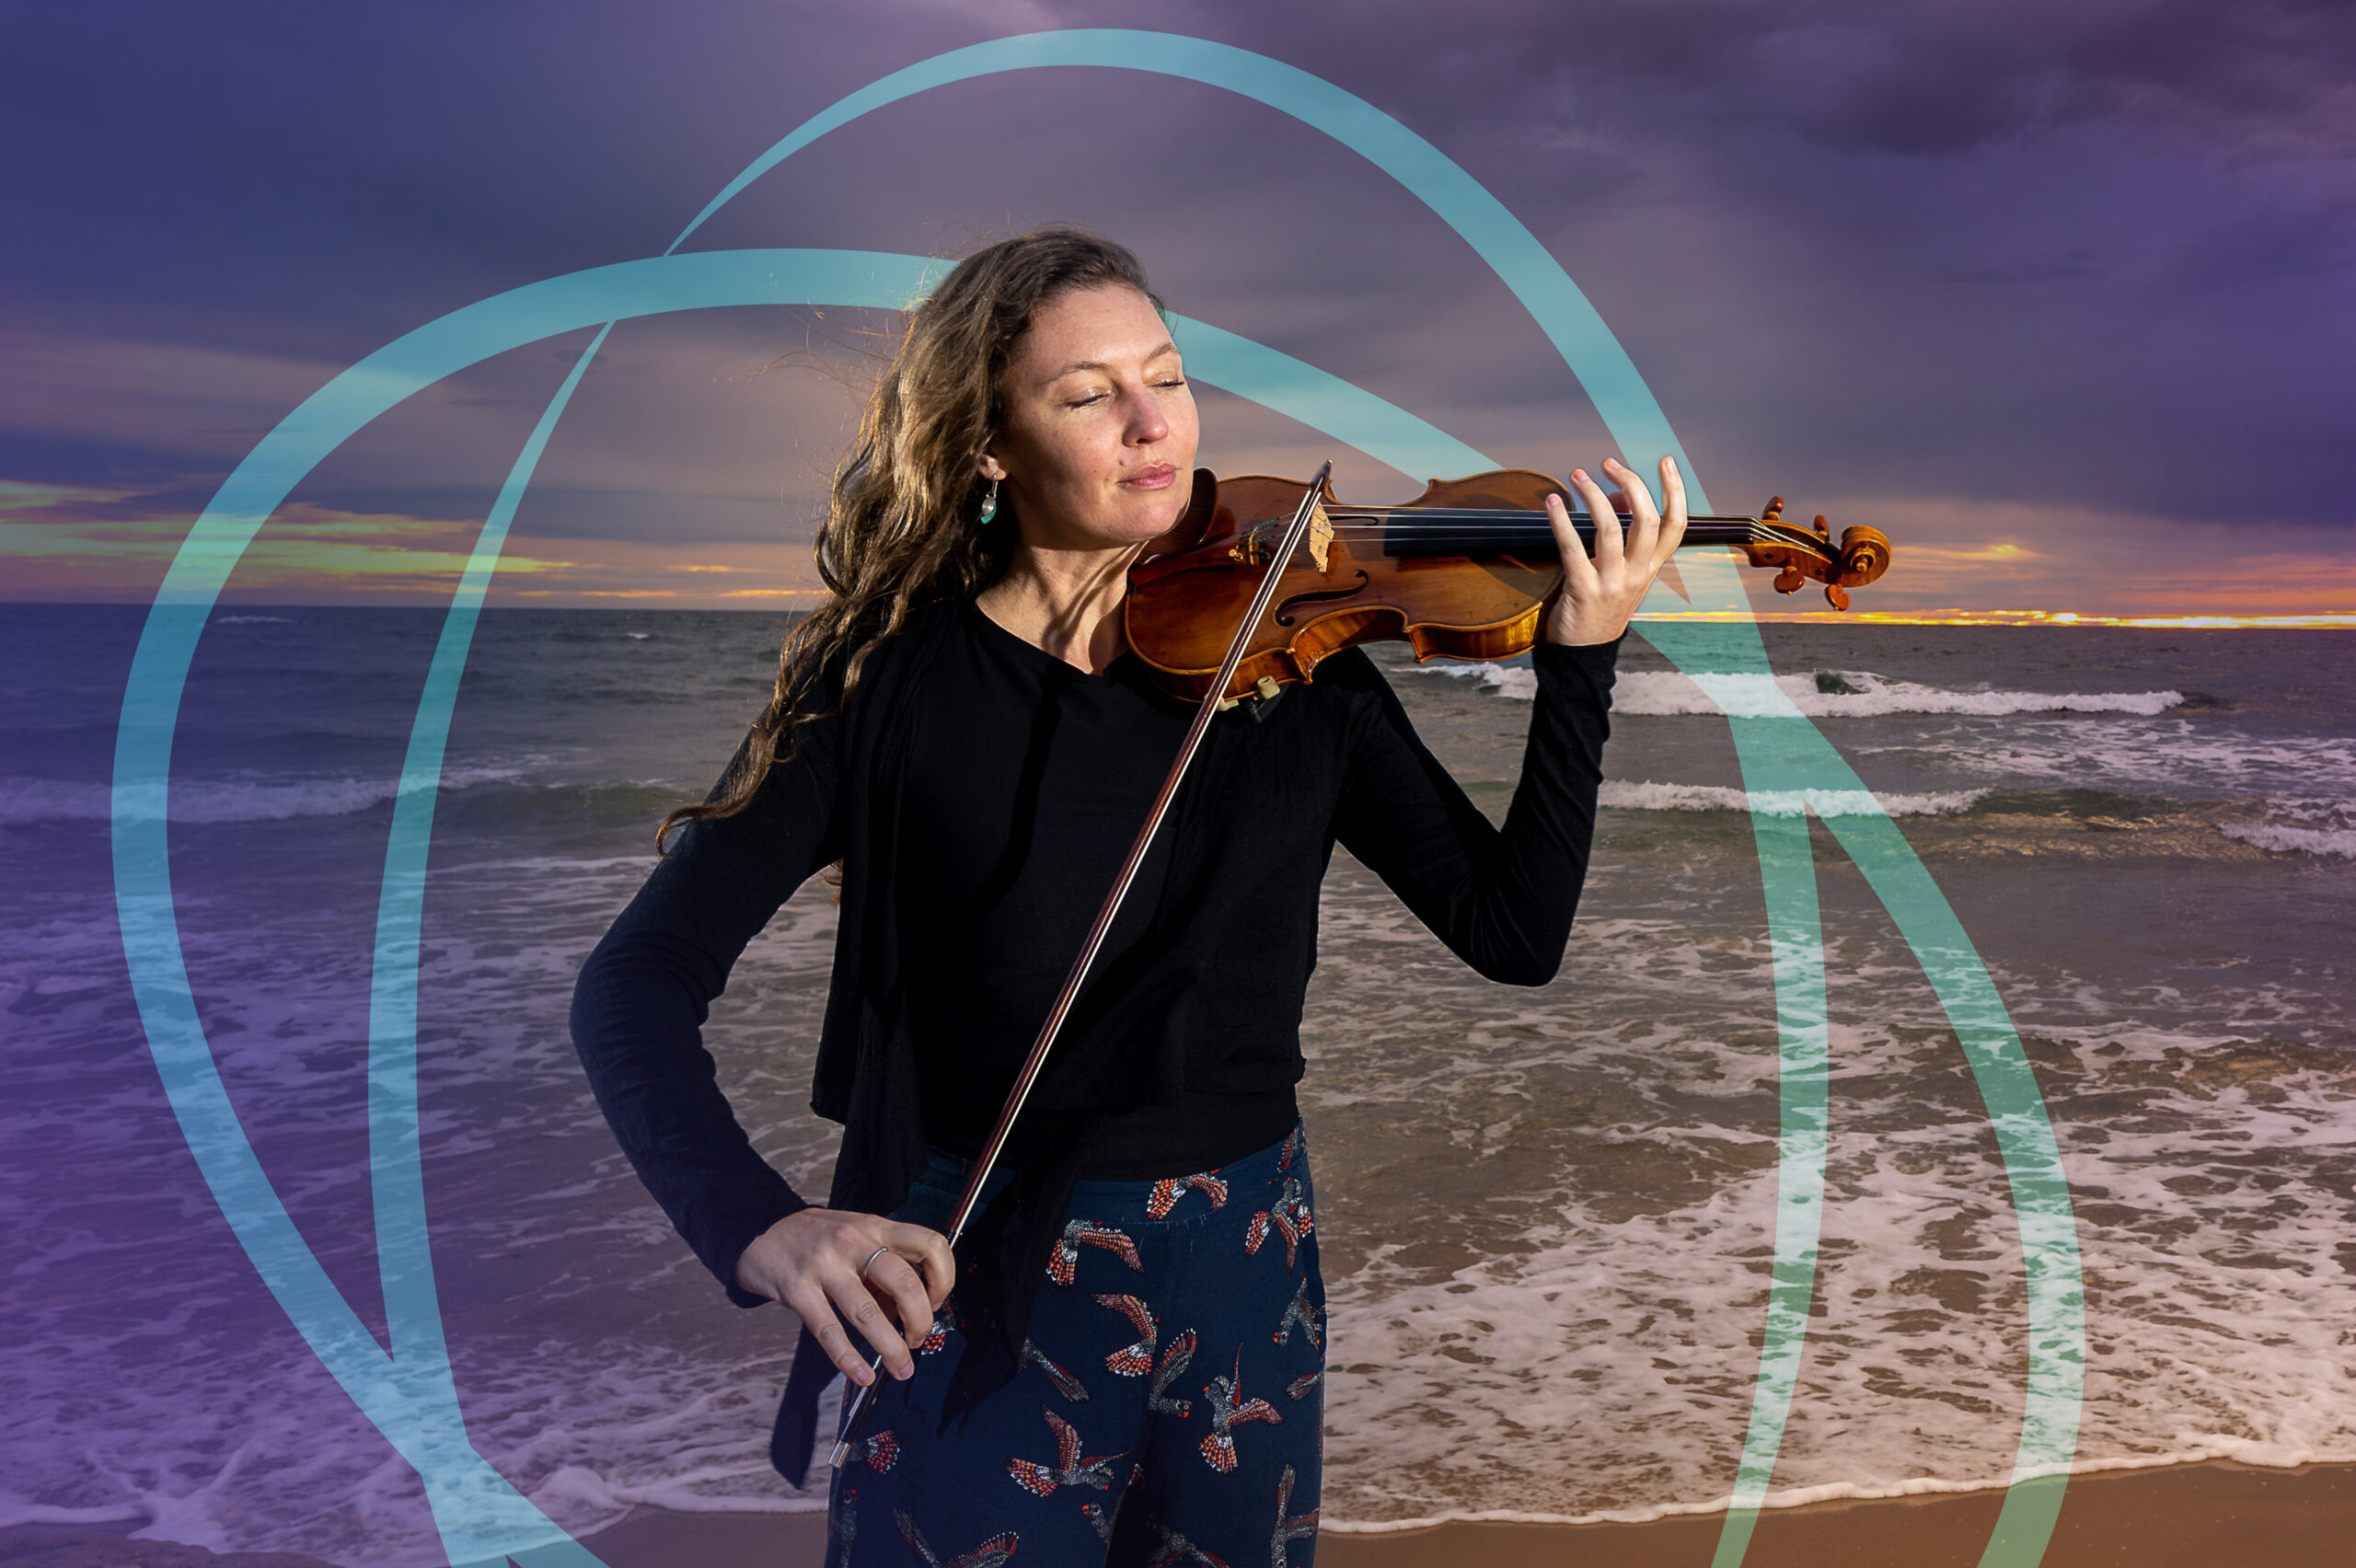 Australian Violinist revives historical improvisation in classical music featured image